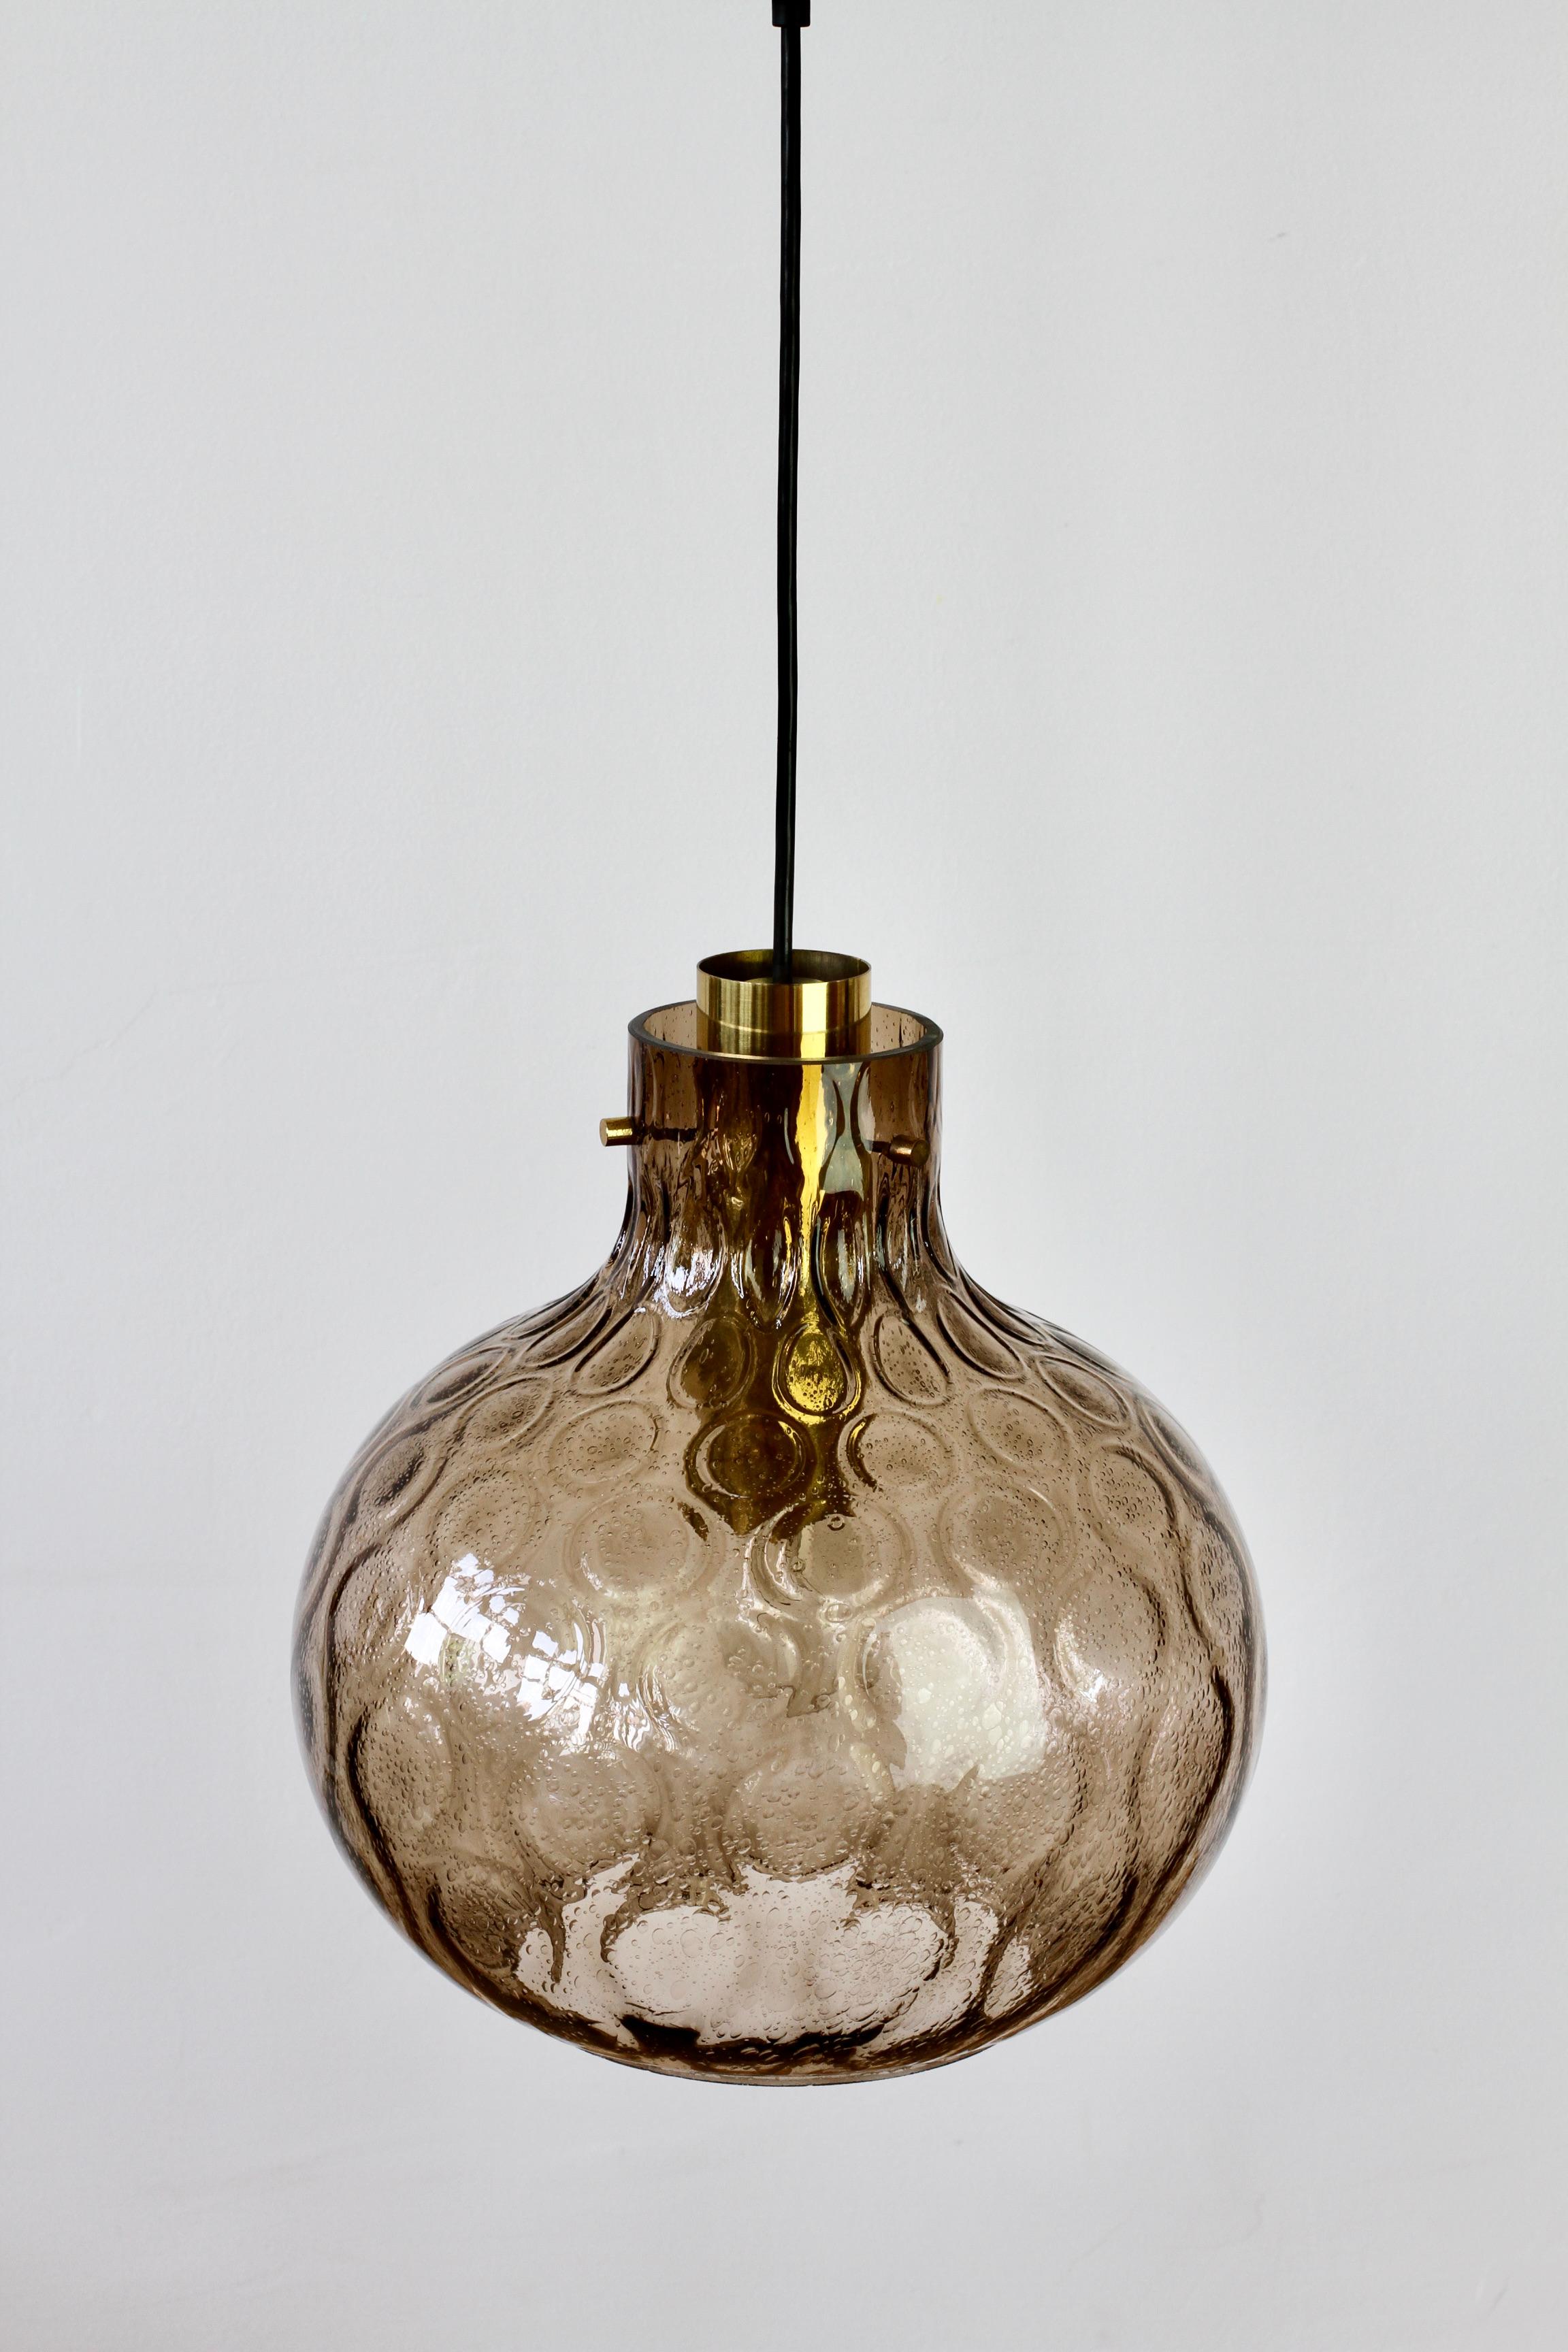 One of a pair of large vintage mid-century hanging bubble glass pendant lights / lanterns by Glashütte Limburg. Made in the late 1960s throughout to the late 1970s, these gorgeous lamps feature a mouth blown, bell shaped, smoked glass globe